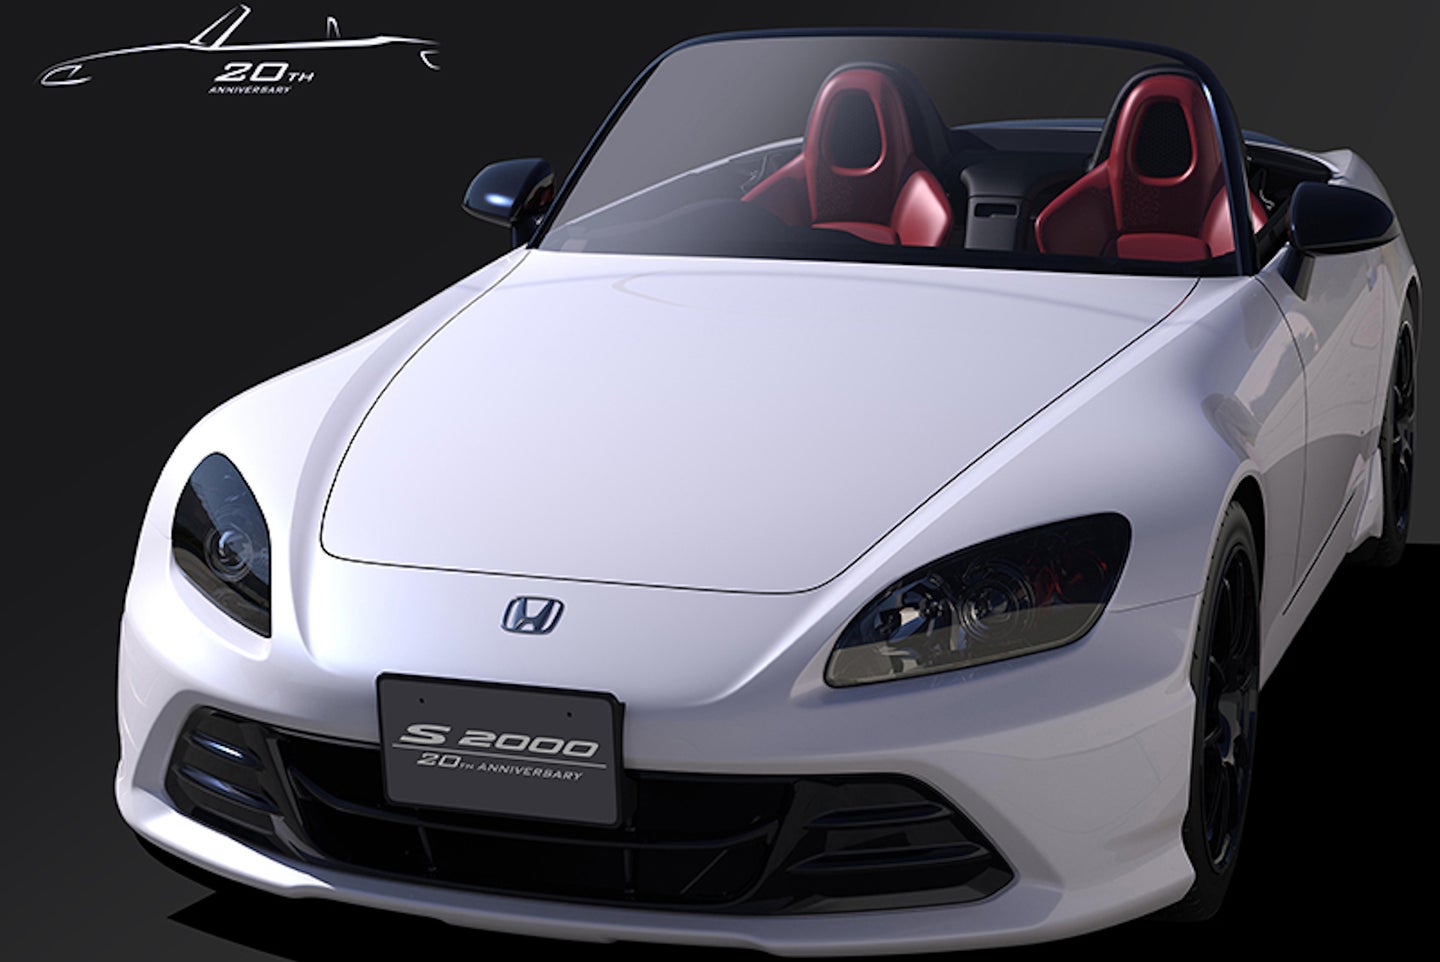 Honda Reimagines S2000 Roadster for 2020 With New Anniversary-Edition Prototype